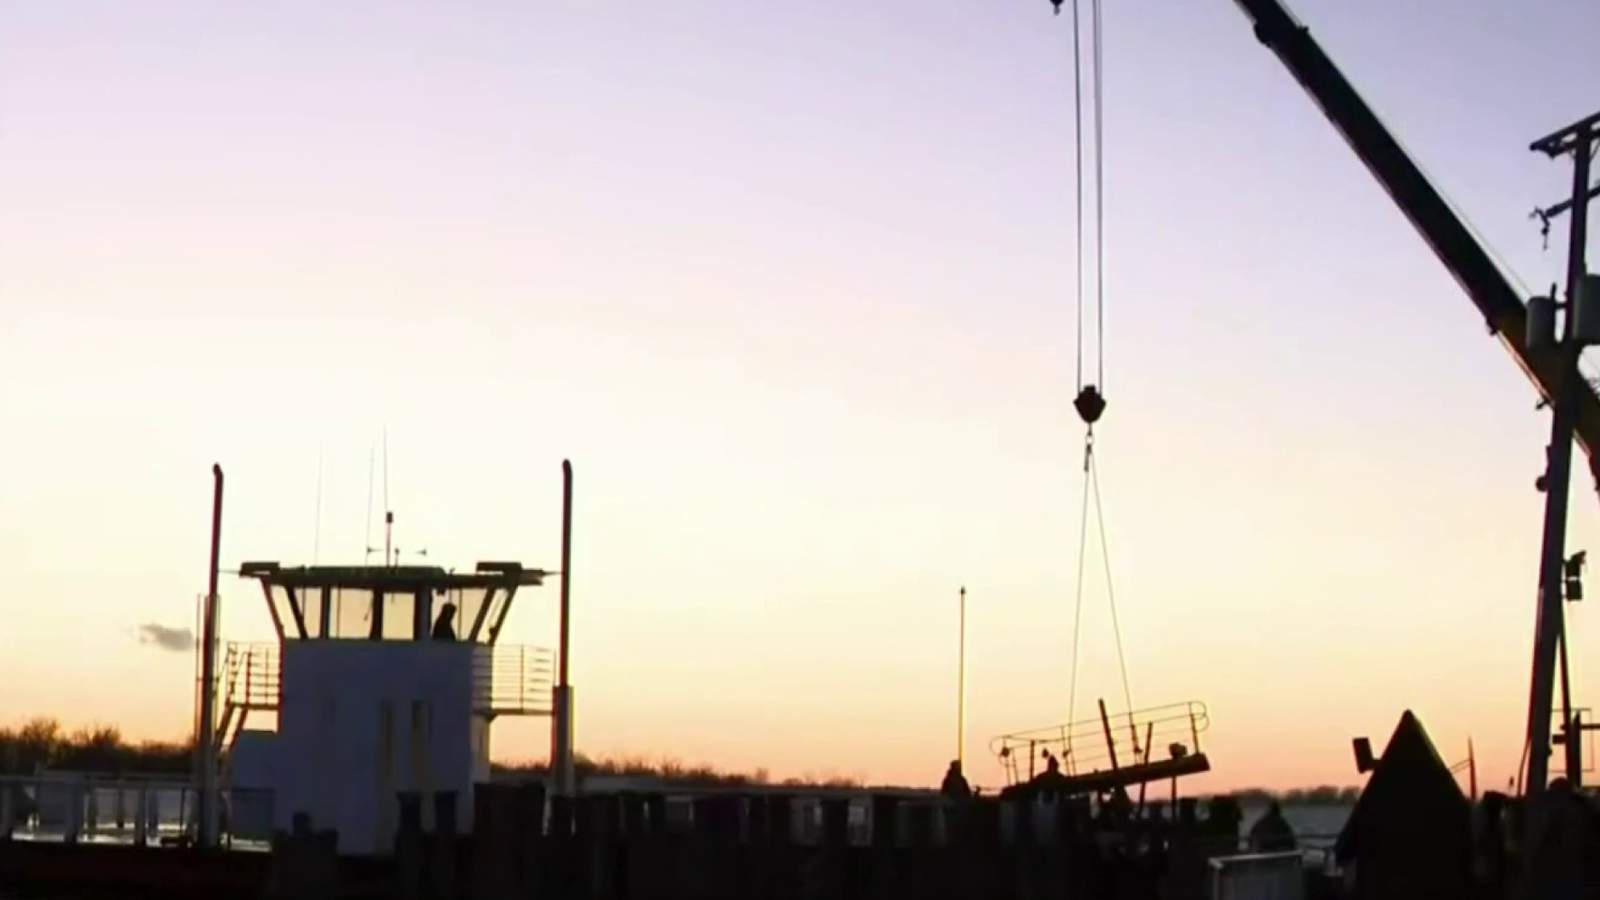 Harsens Island ferry service disrupted after dock collapses, crane takes out power lines